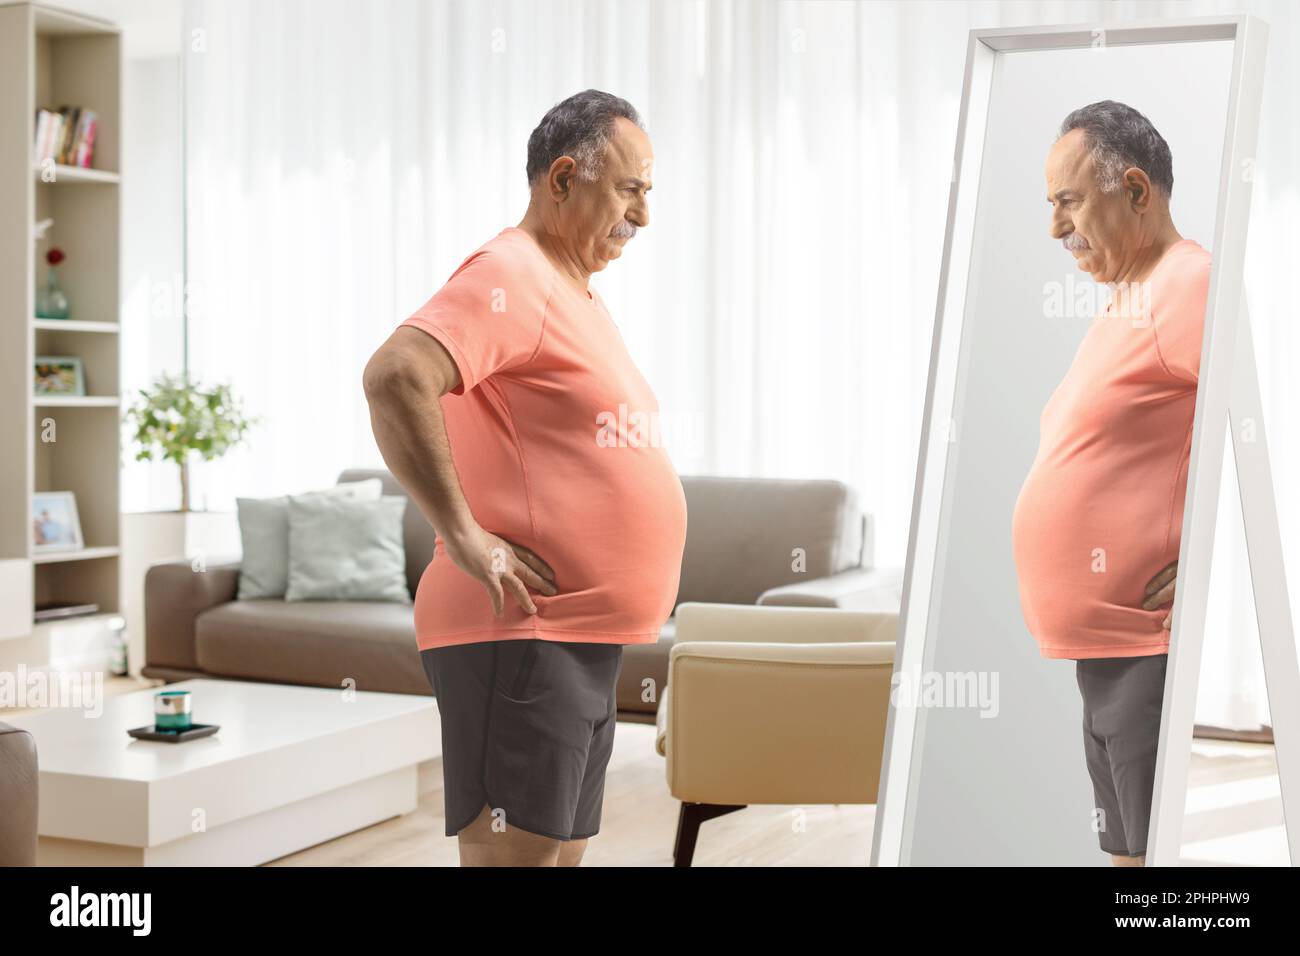 Mature man with a big belly standing in front of a mirror at home in a living room Stock Photo